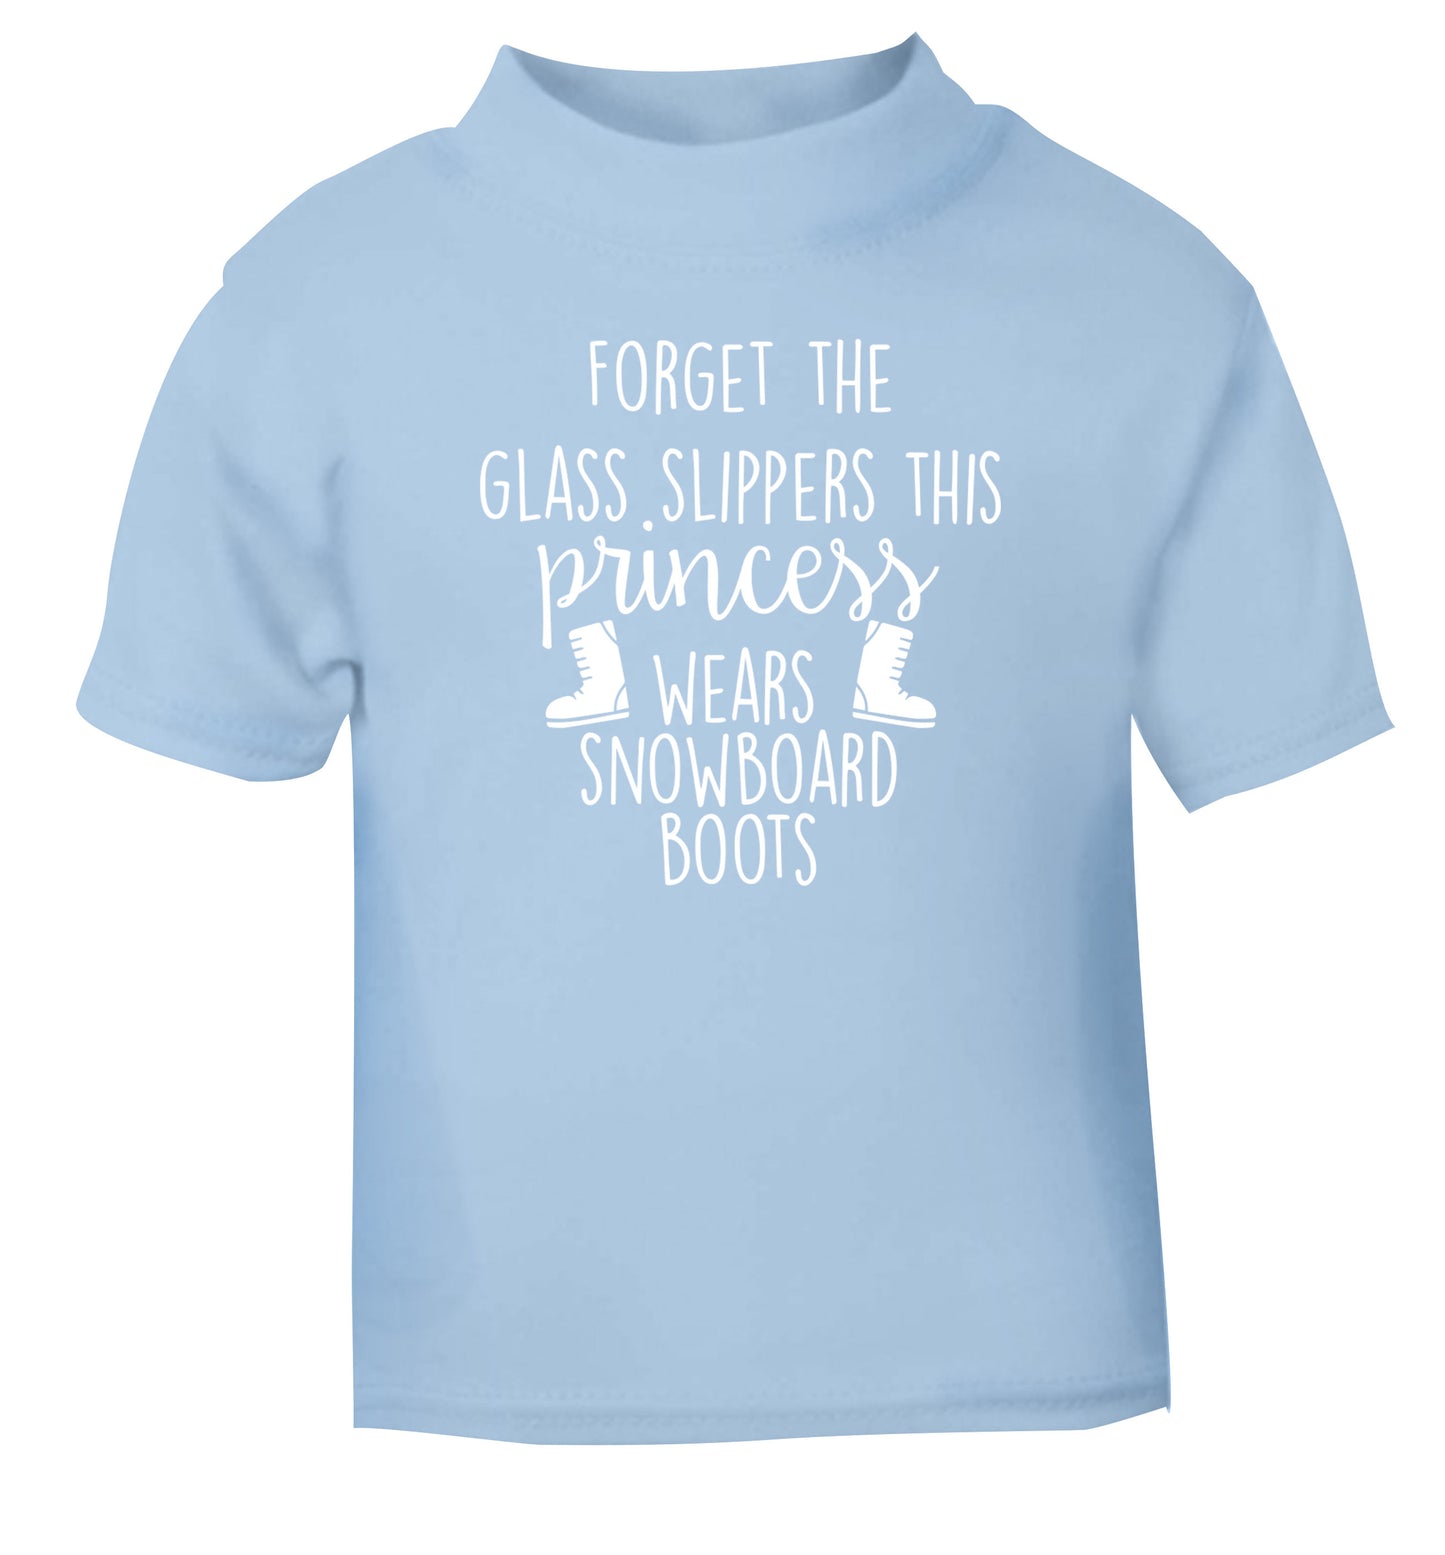 Forget the glass slippers this princess wears snowboard boots light blue Baby Toddler Tshirt 2 Years